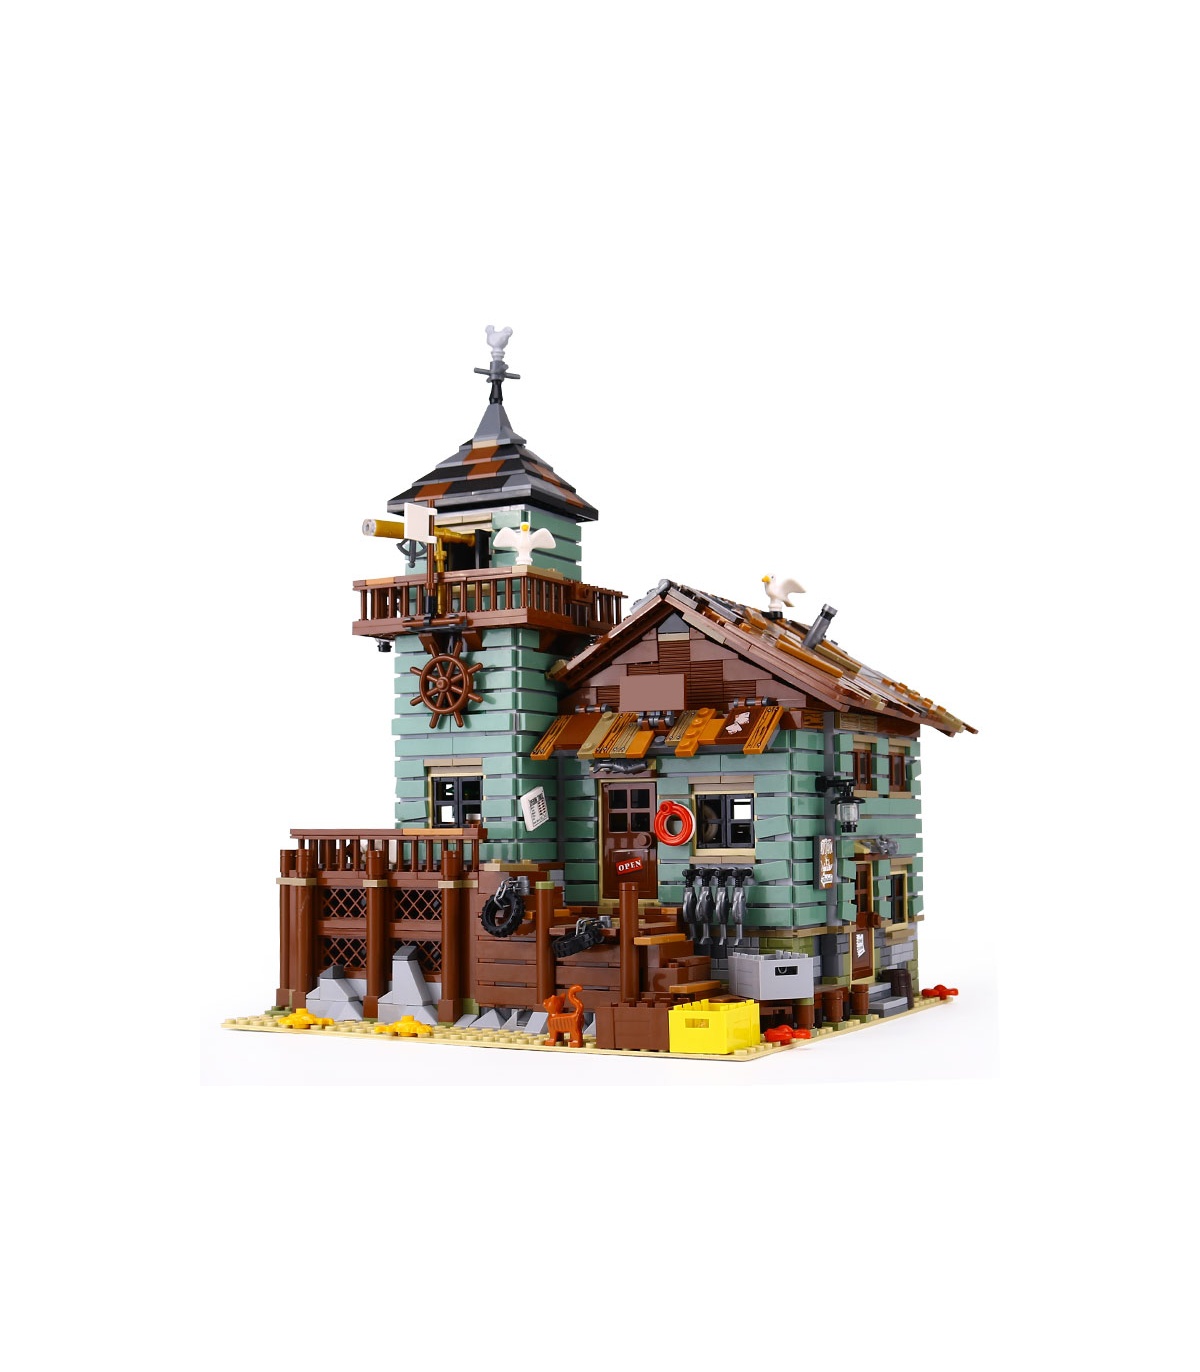 The Old Fishing Store Series 16050 9 Sets Street View MOC Model Building